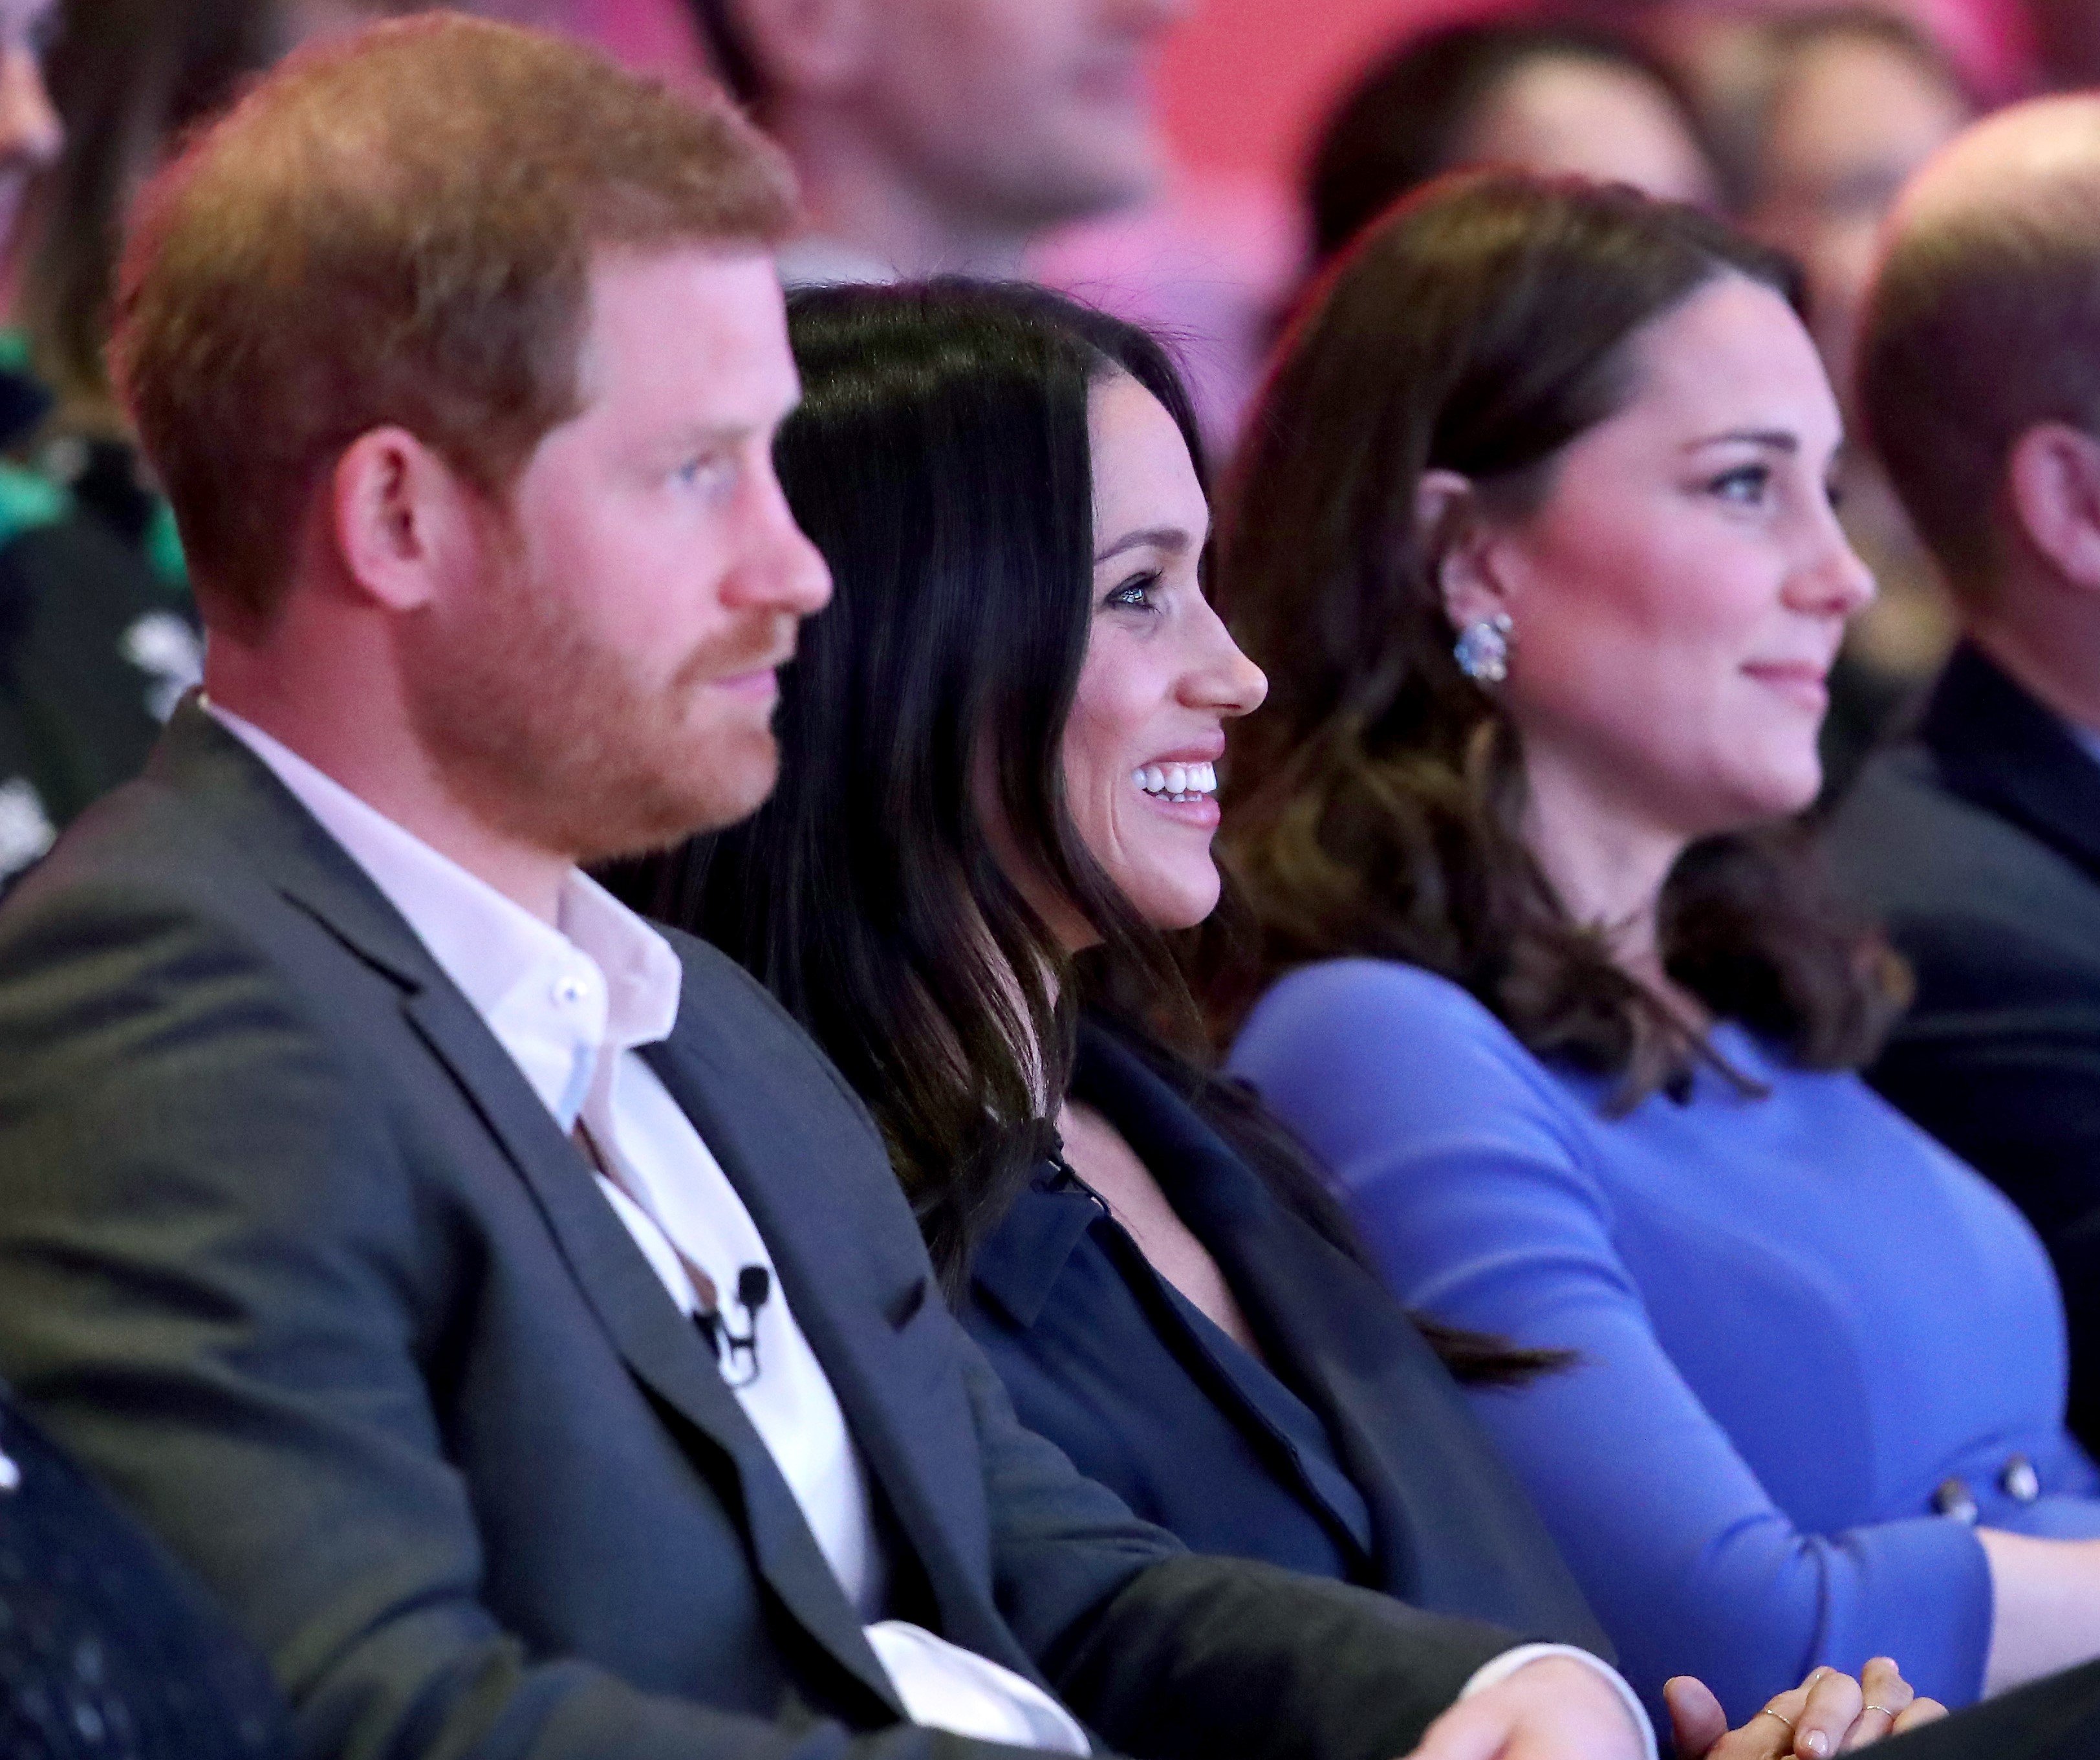 Prince Harry, Meghan Markle, and Kate Middleton attend the first annual Royal Foundation Forum